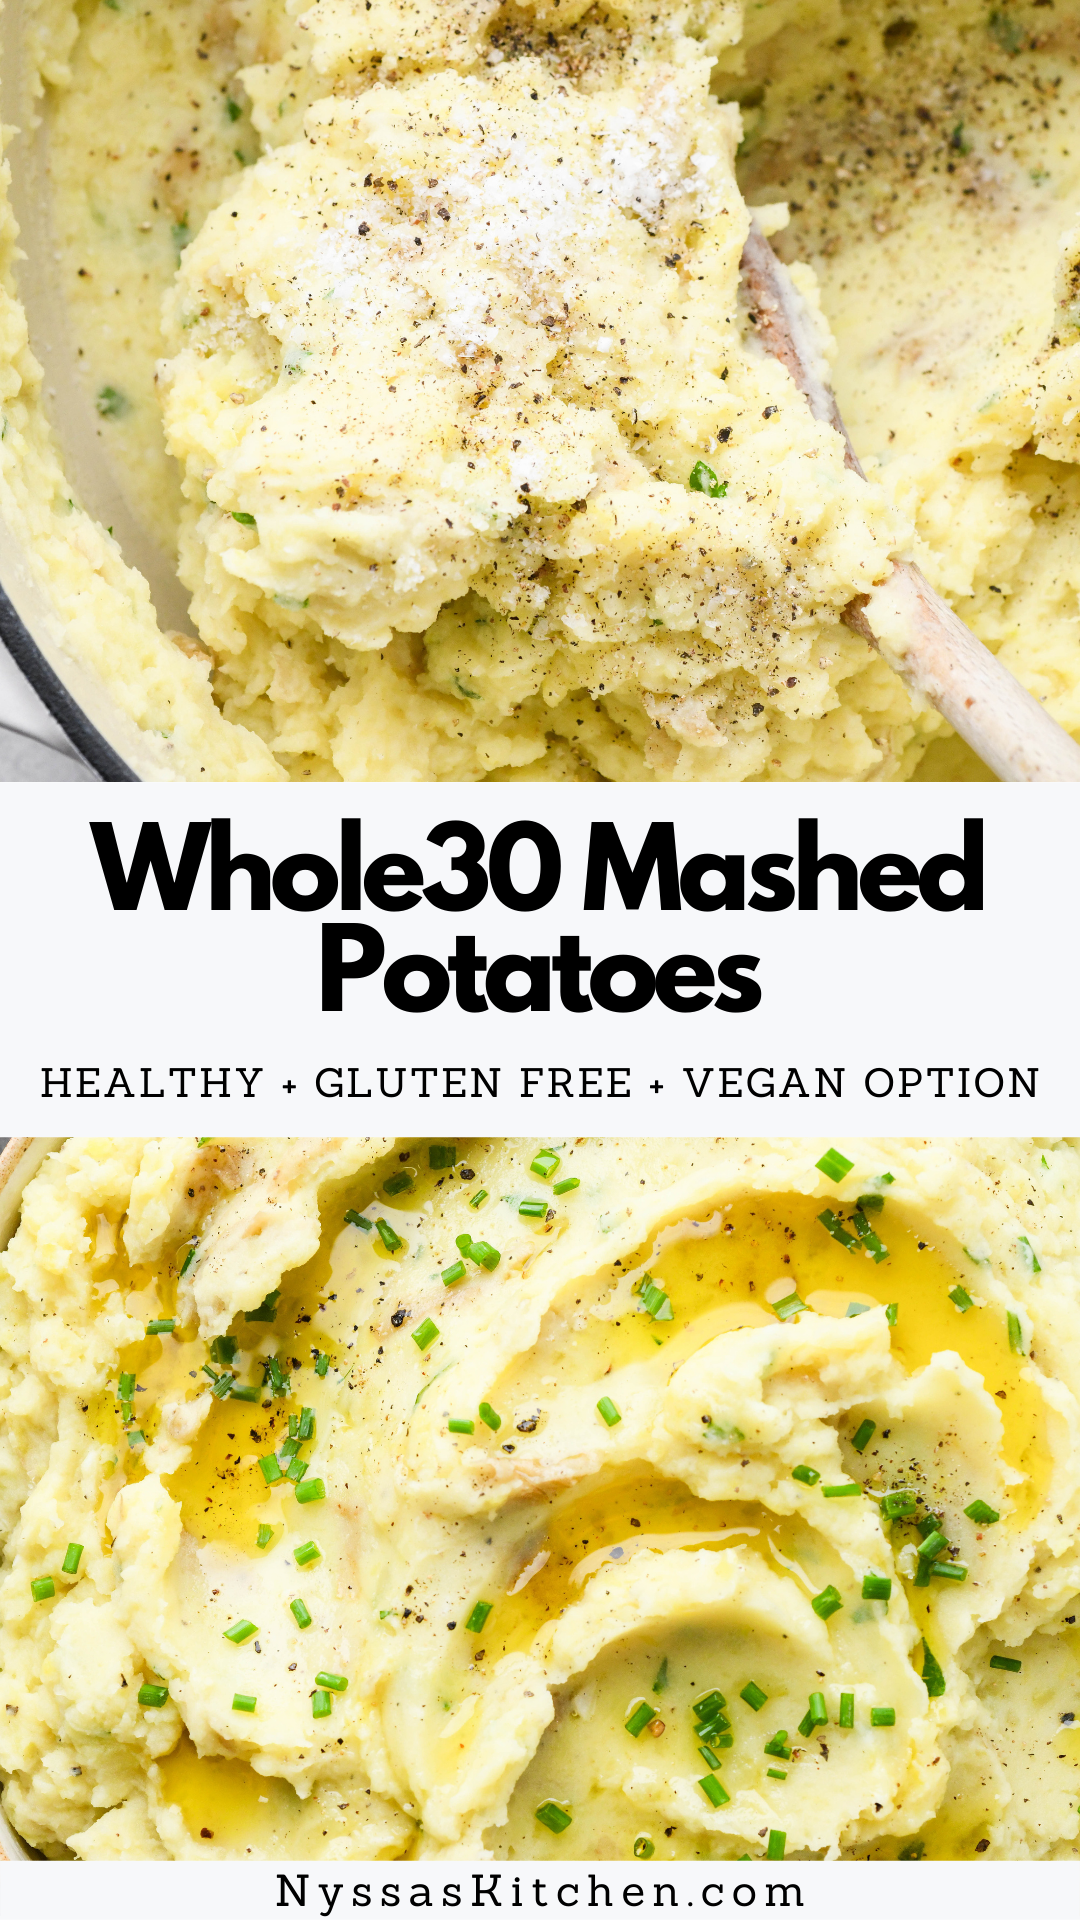 Whole30 garlic herb mashed potatoes are the healthy homemade comfort food side dish you need! Made with buttery Yukon gold potatoes, garlic infused ghee, and a generous handful of fresh herbs. They are savory, creamy, and absolutely irresistible. Whole30, paleo, gluten free, and vegan option.